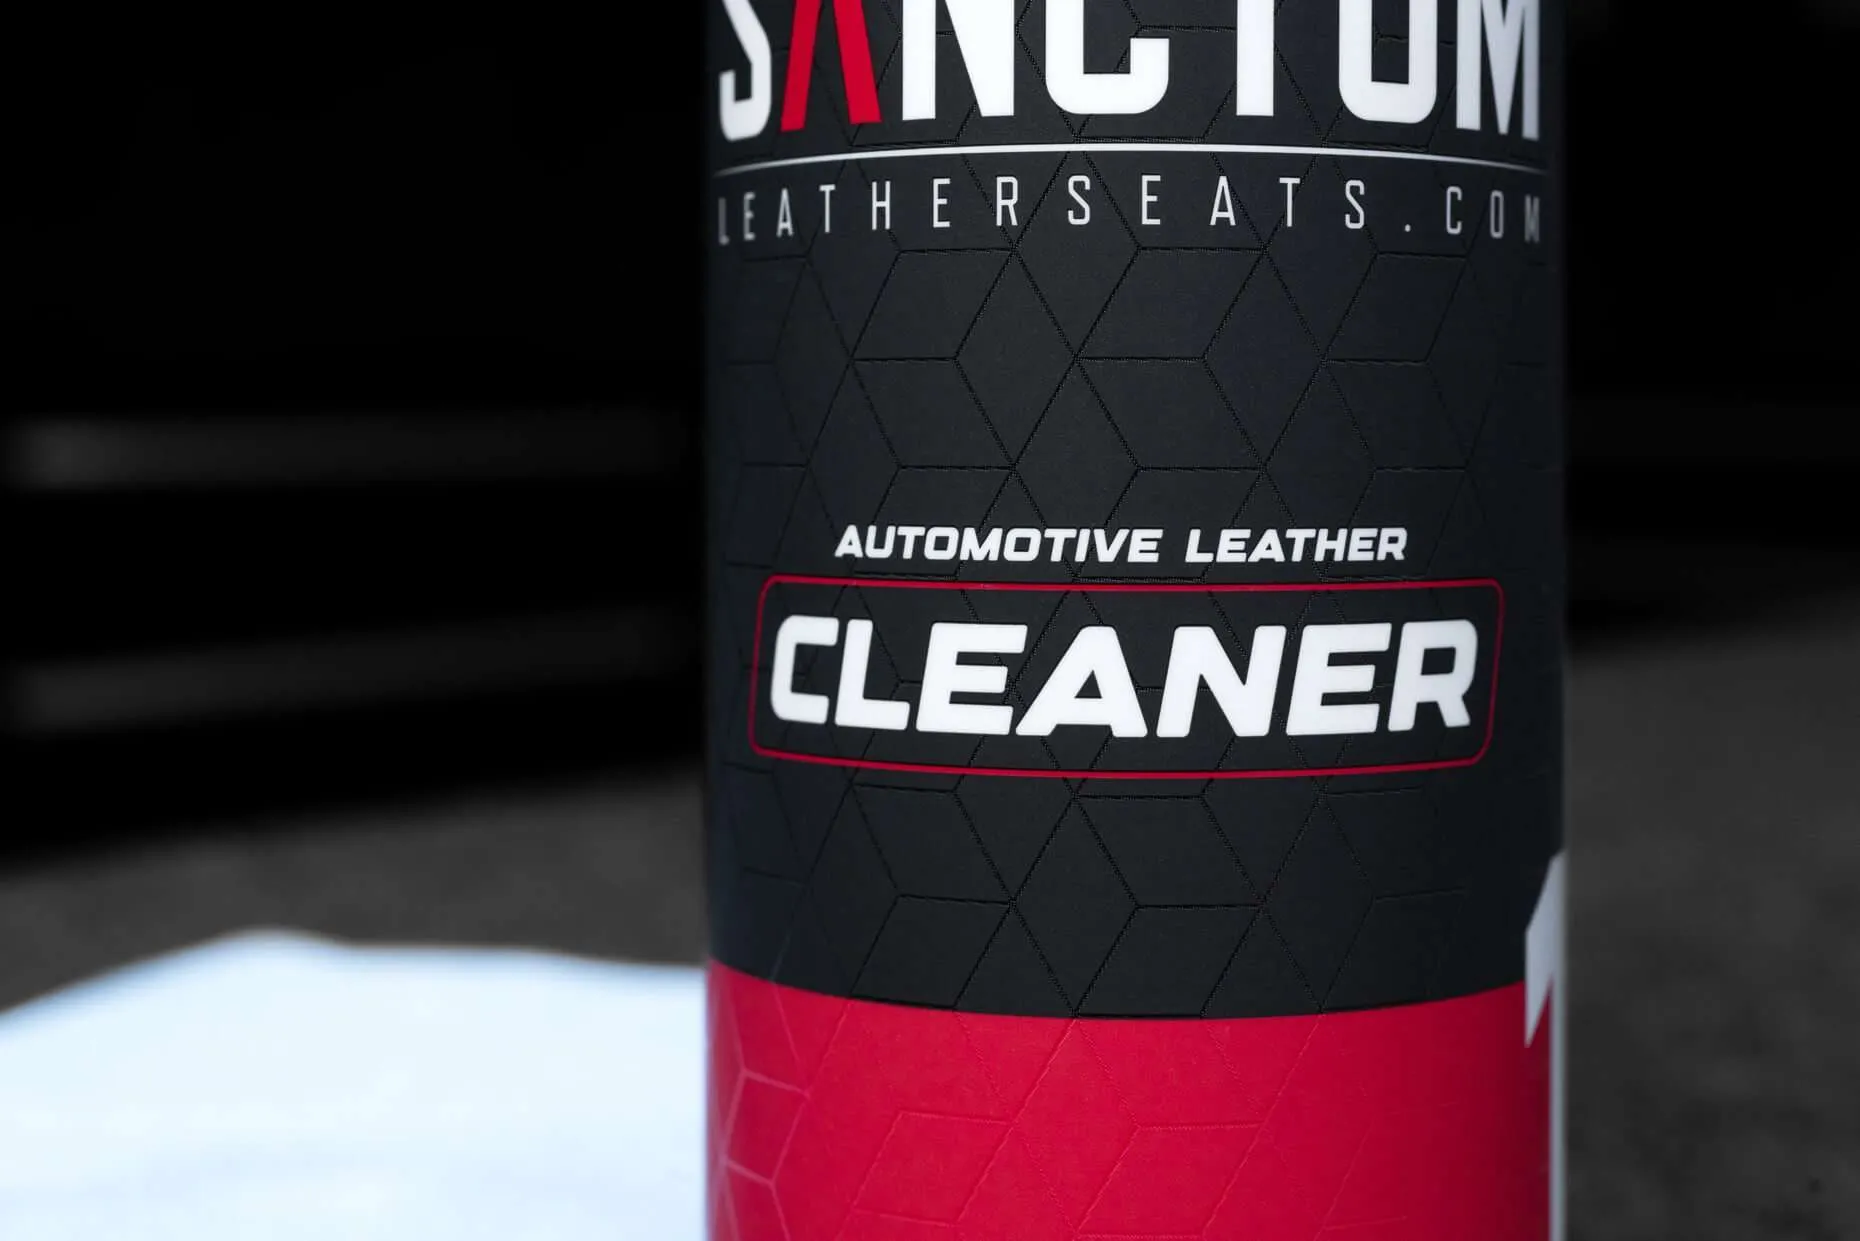 16oz bottle of Sanctum automotive leather cleaner with microfiber towel - close view of product name